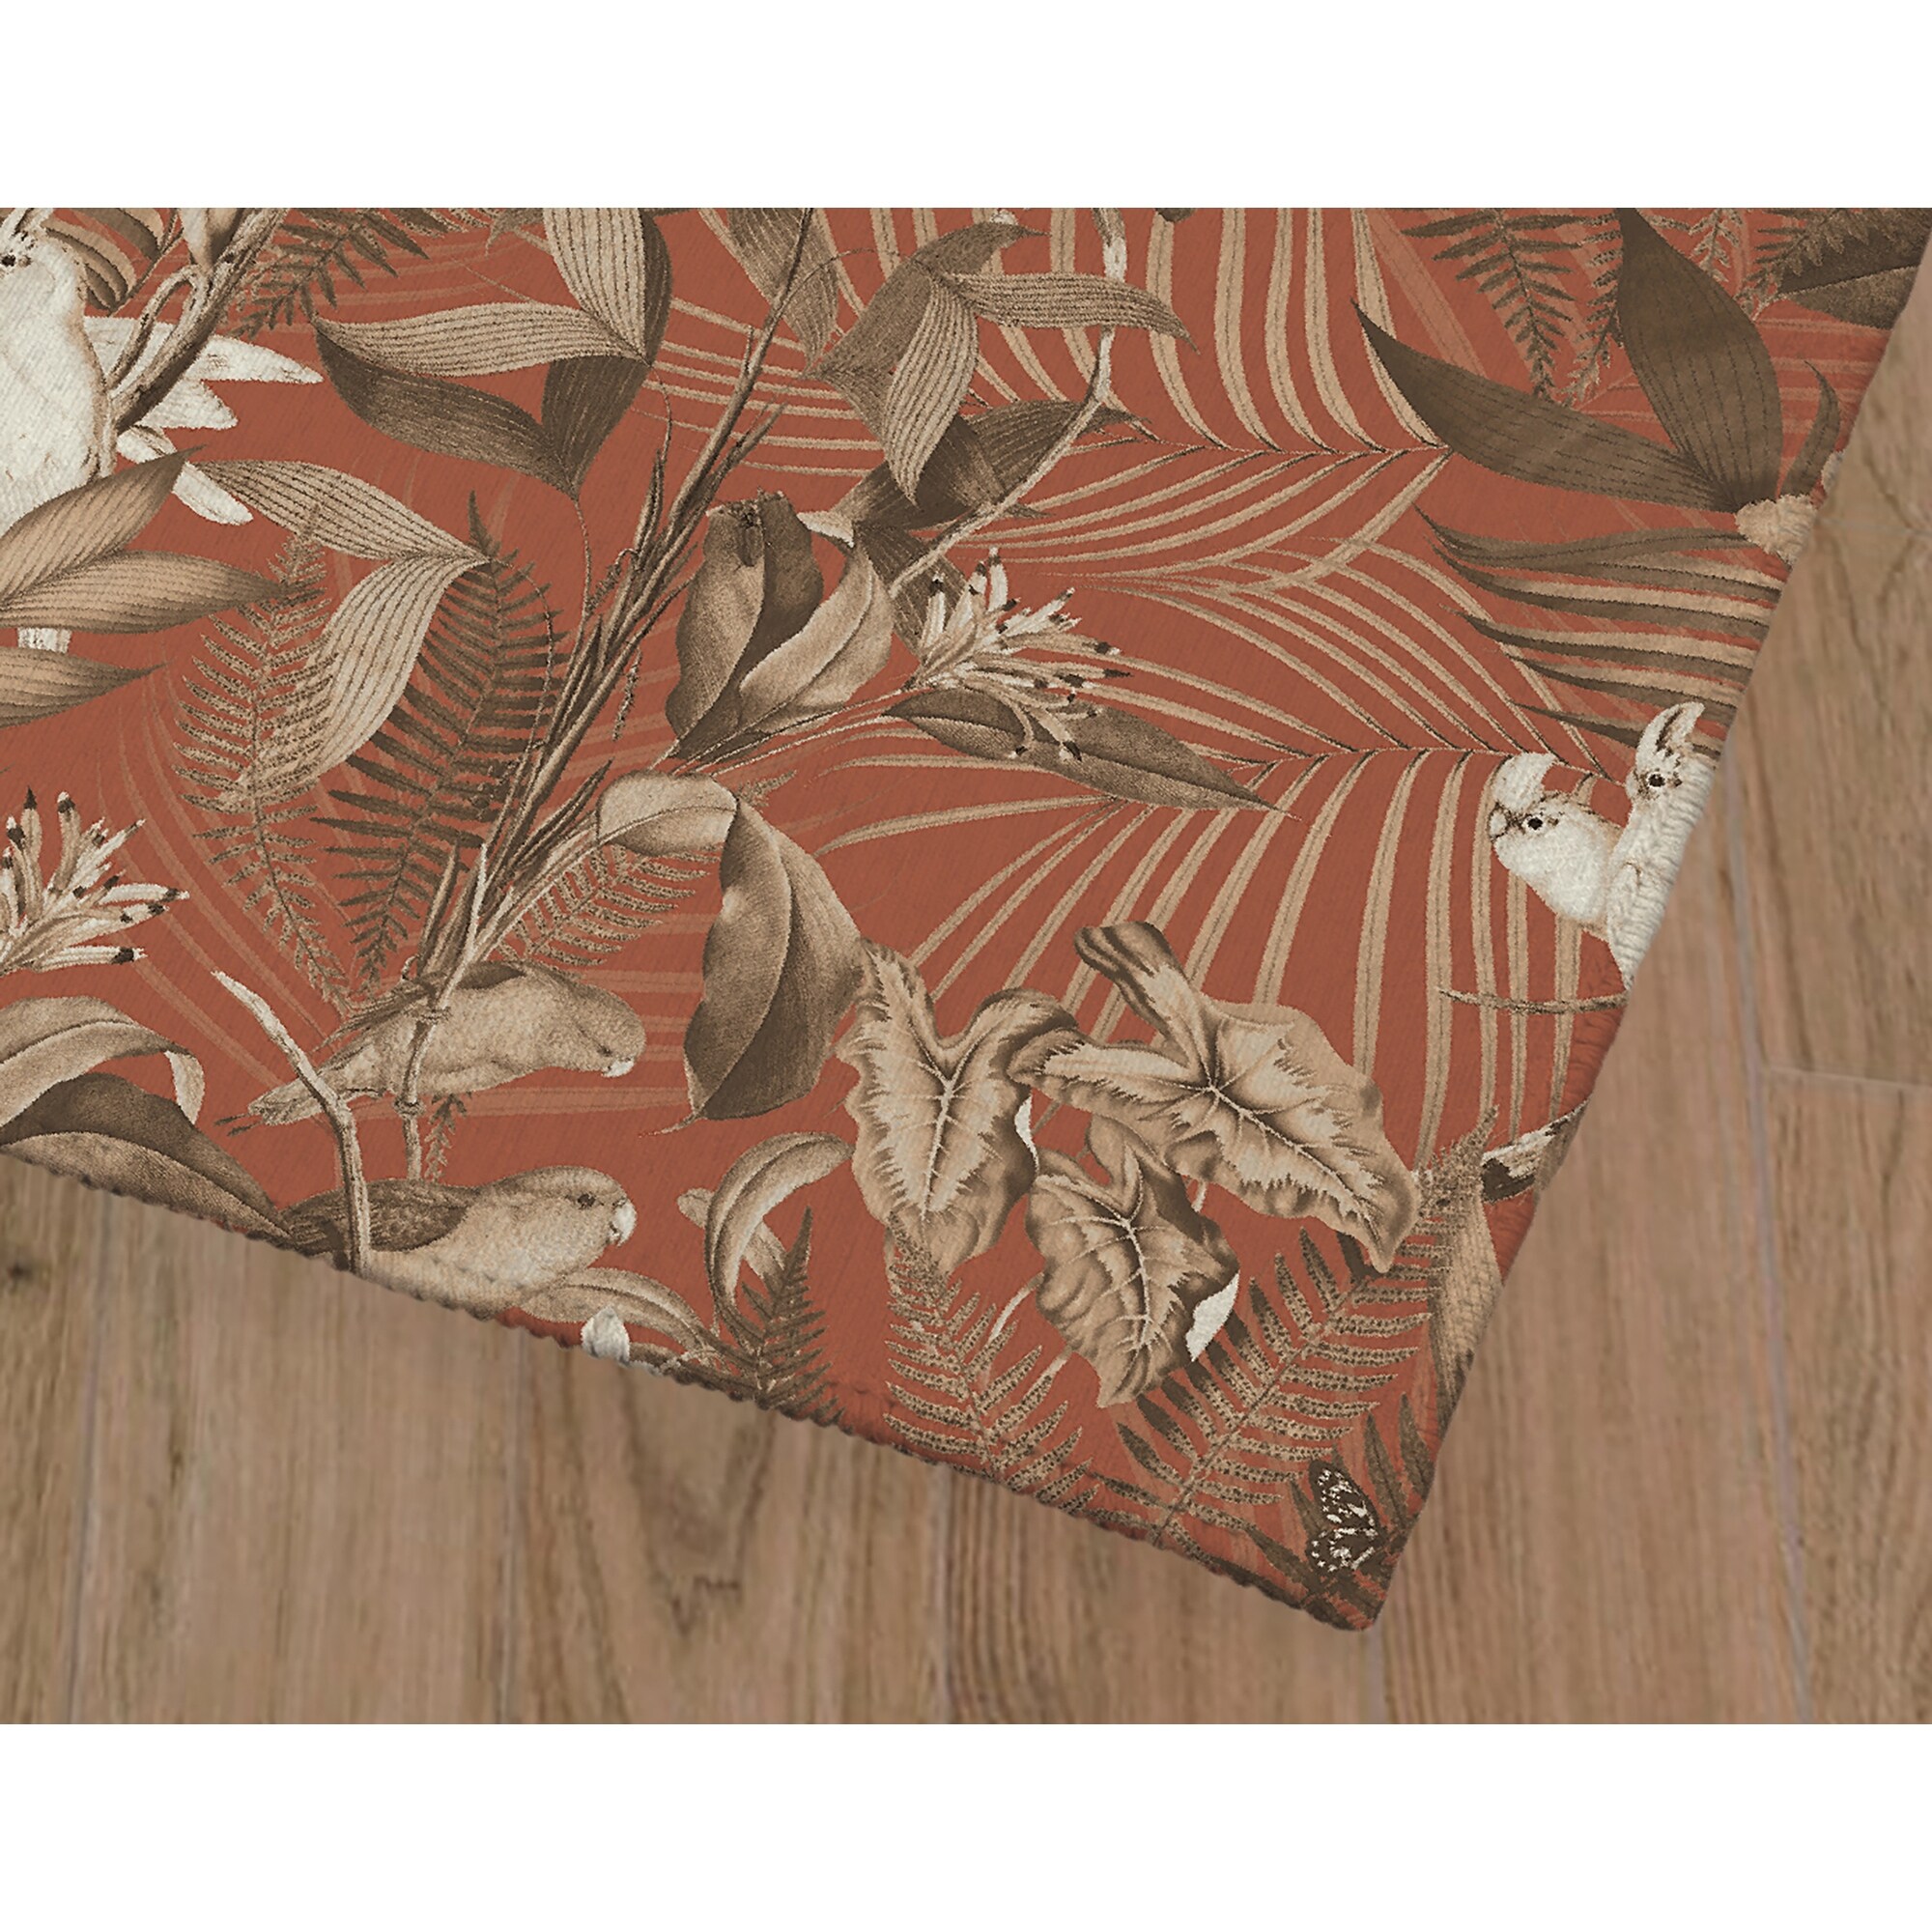 https://ak1.ostkcdn.com/images/products/is/images/direct/6bba832d3d5c1ff03c20d96f8e1601f330717624/TROPICAL-JUNGLE-DARK-CORAL-Kitchen-Mat-By-Kavka-Designs.jpg